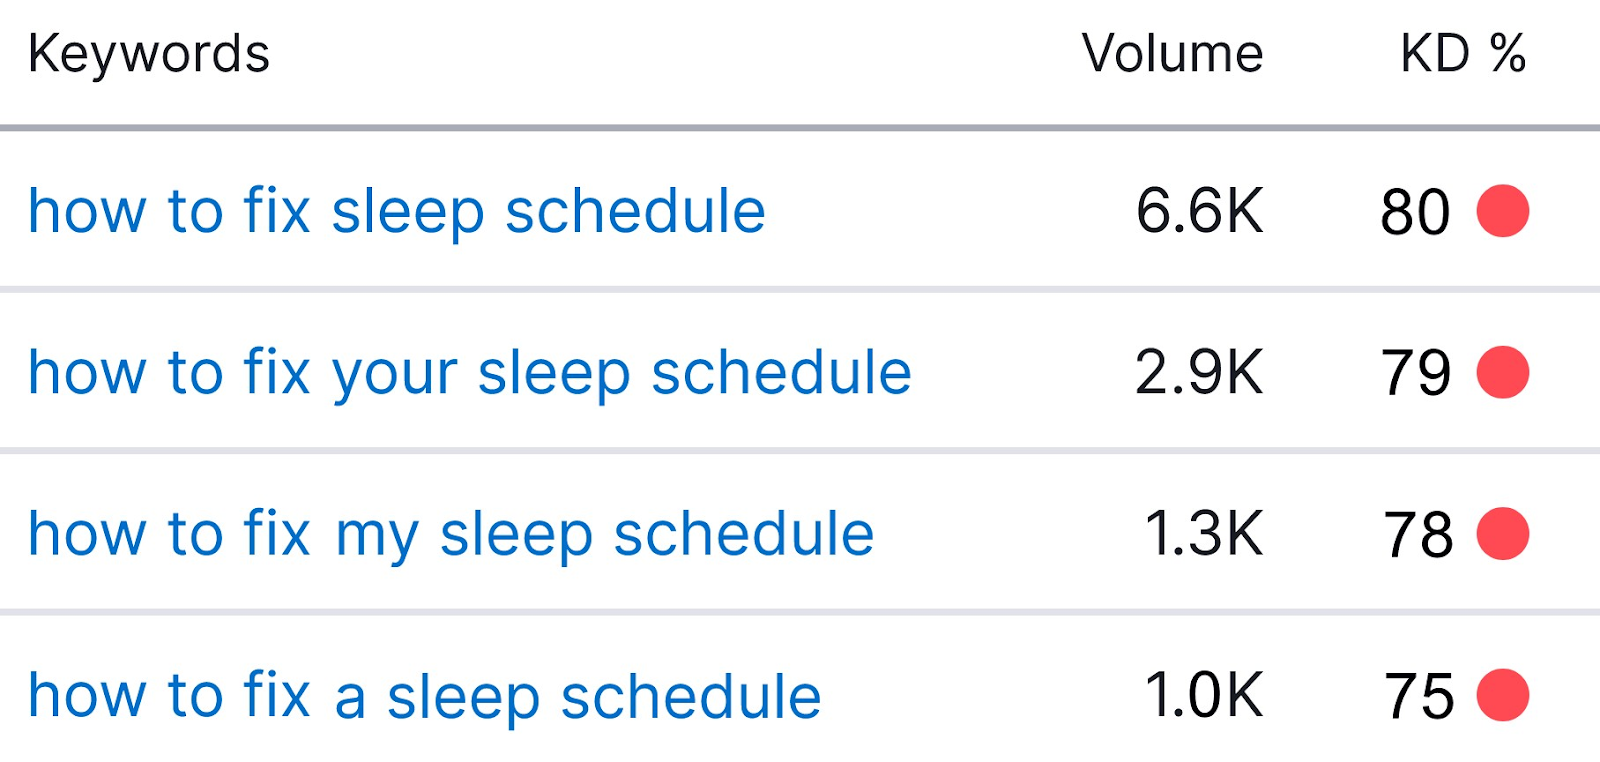 "how to fix sleep schedule" keyword variations and their search volume